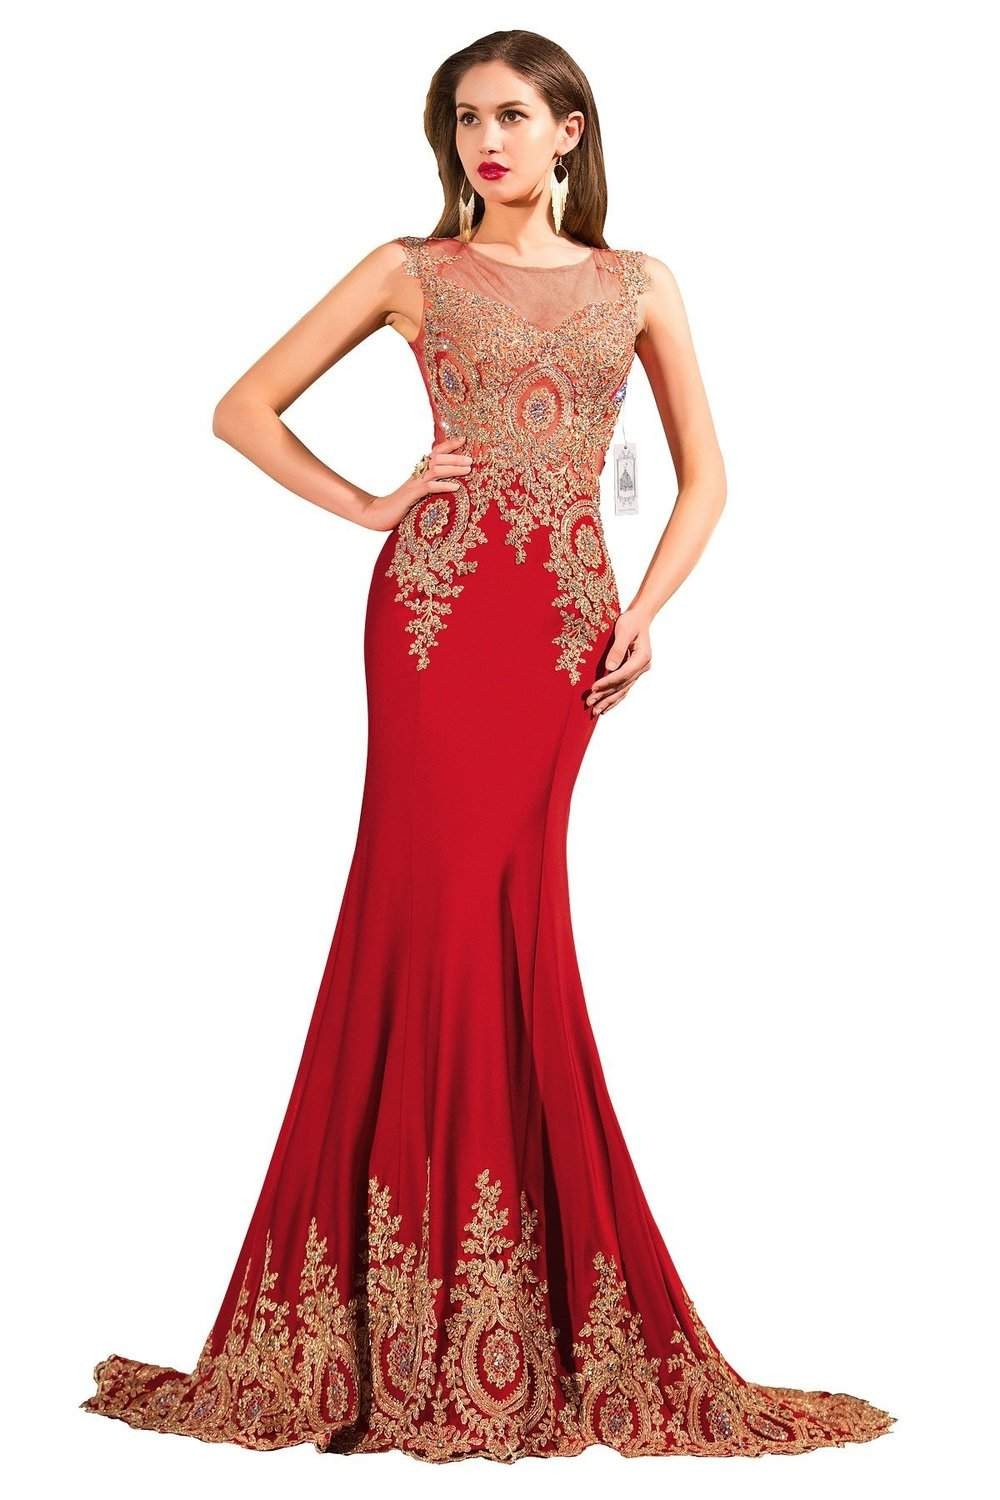 Red Dresses For Wedding
 Top 25 Best Red Wedding Dresses